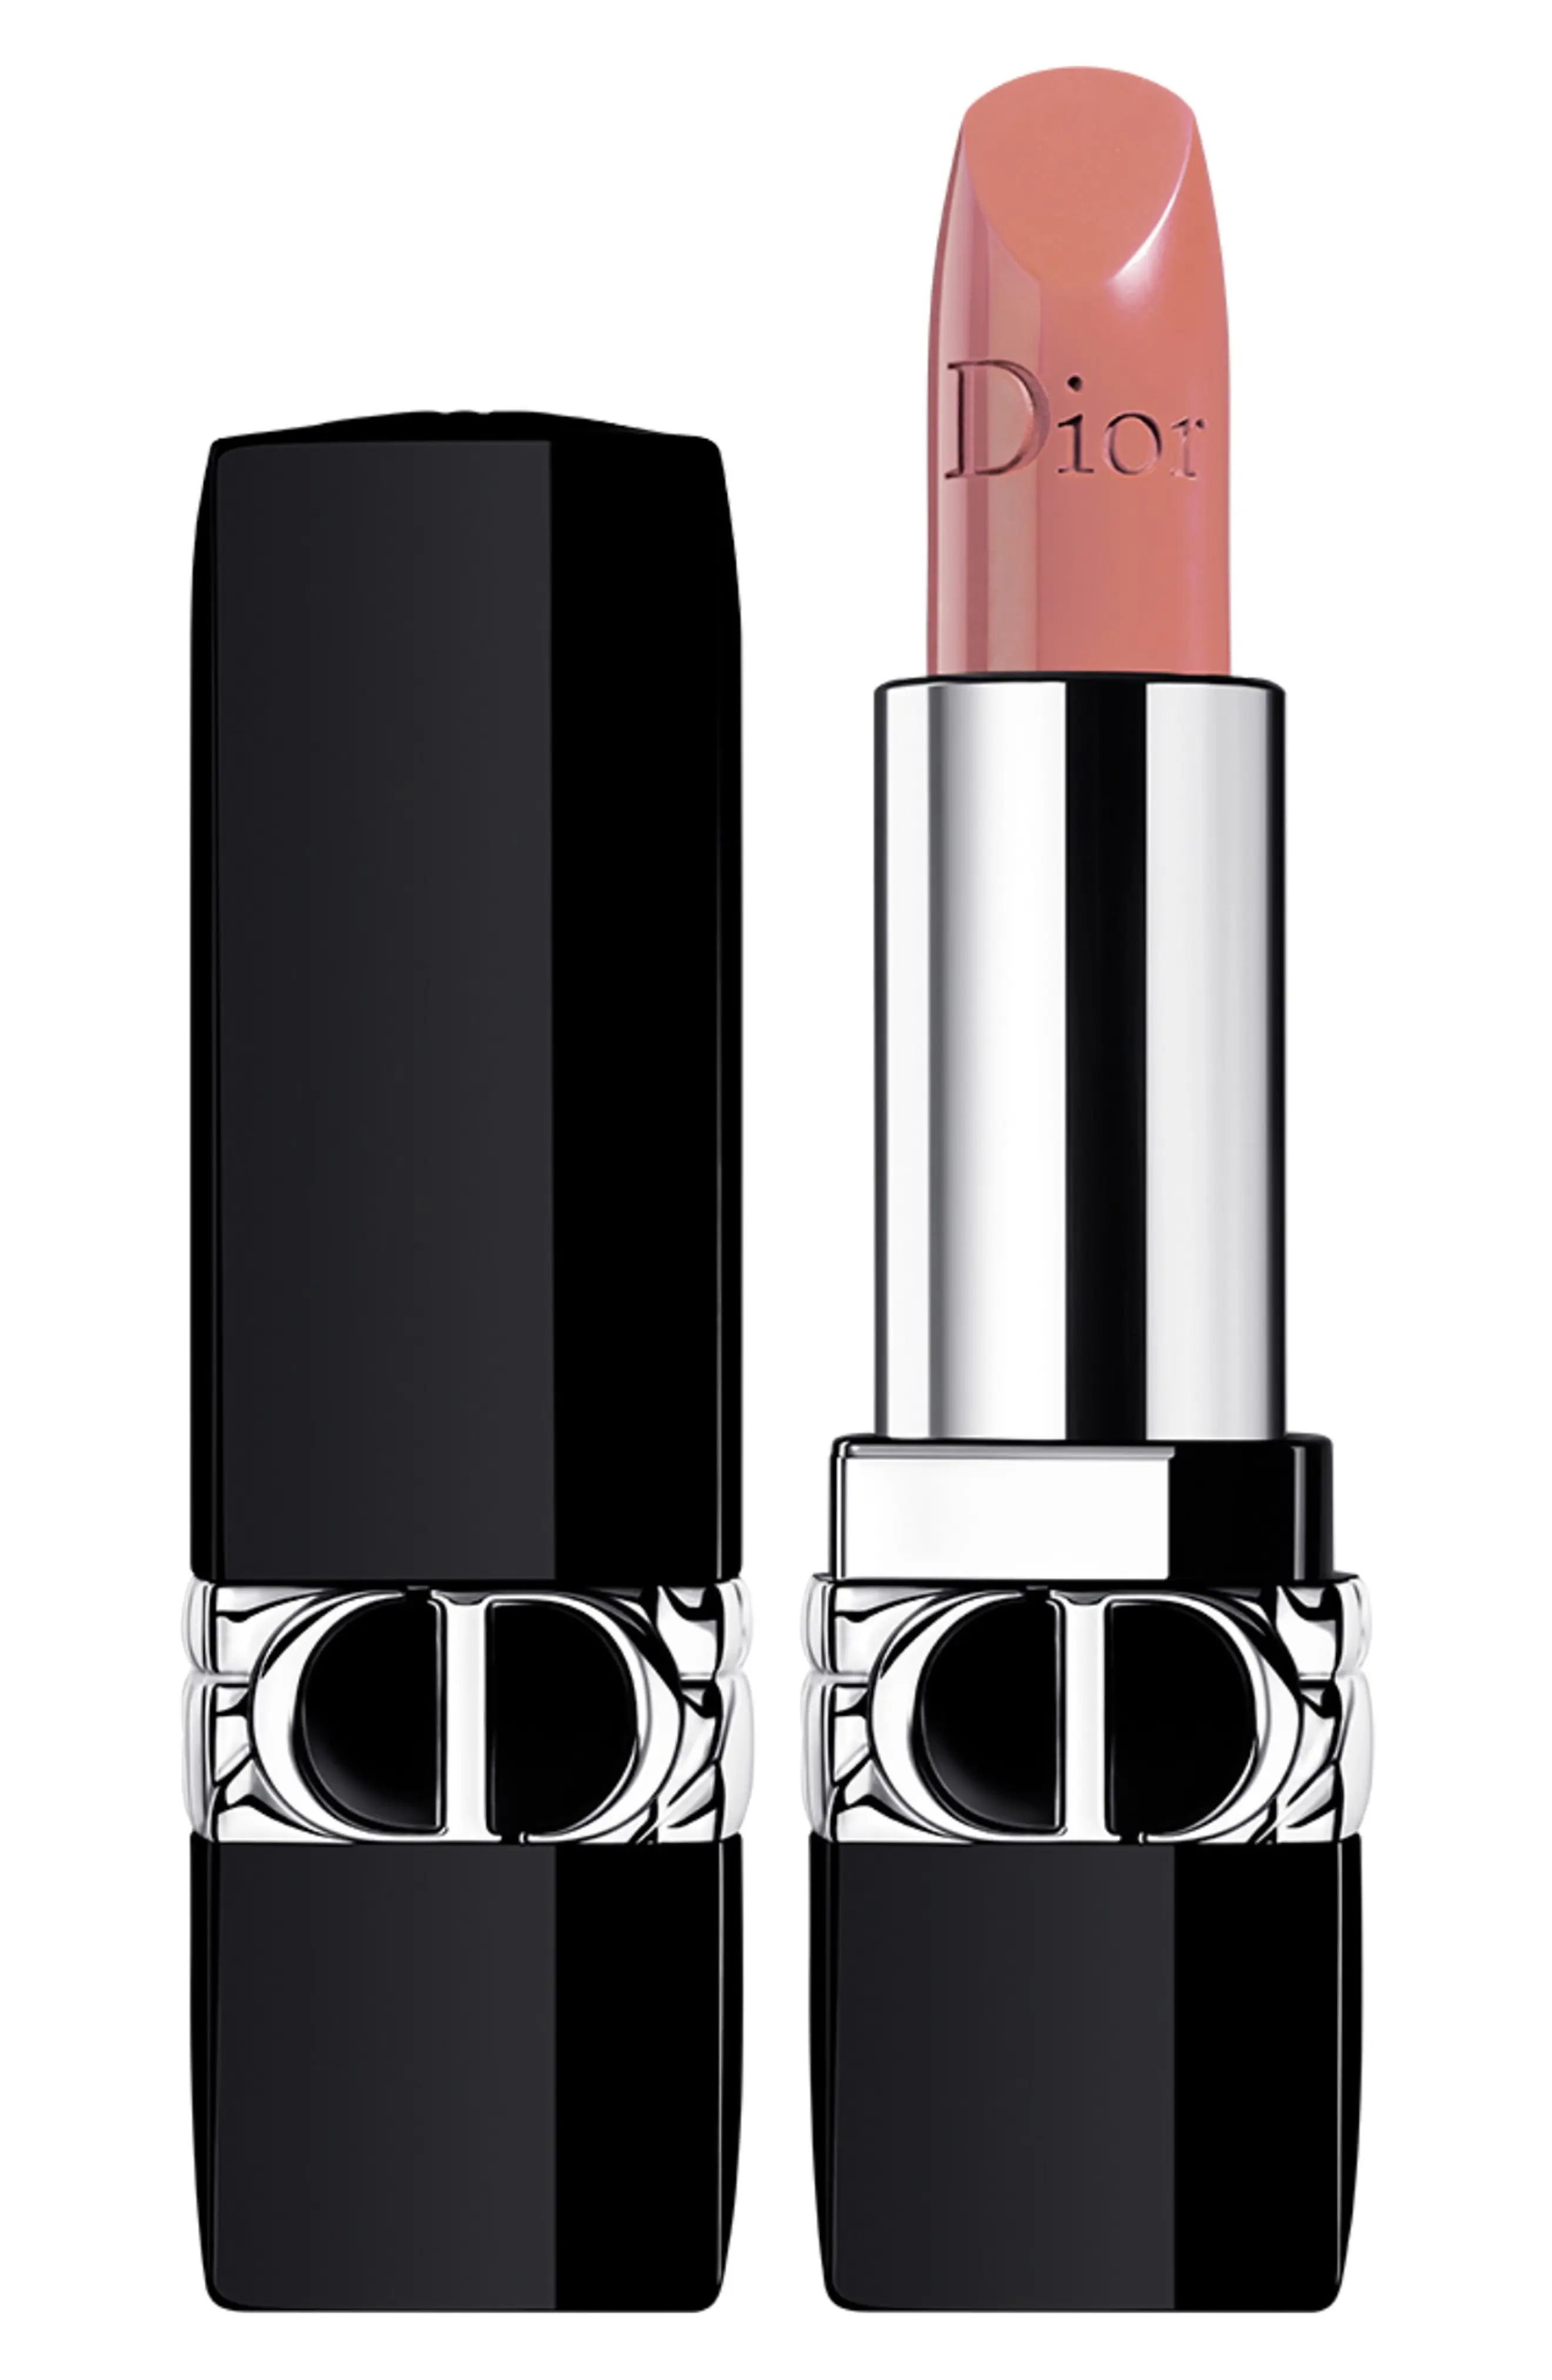 Rouge Dior Refillable Lipstick in 219 Rose Montaigne /Satin at Nordstrom | Nordstrom